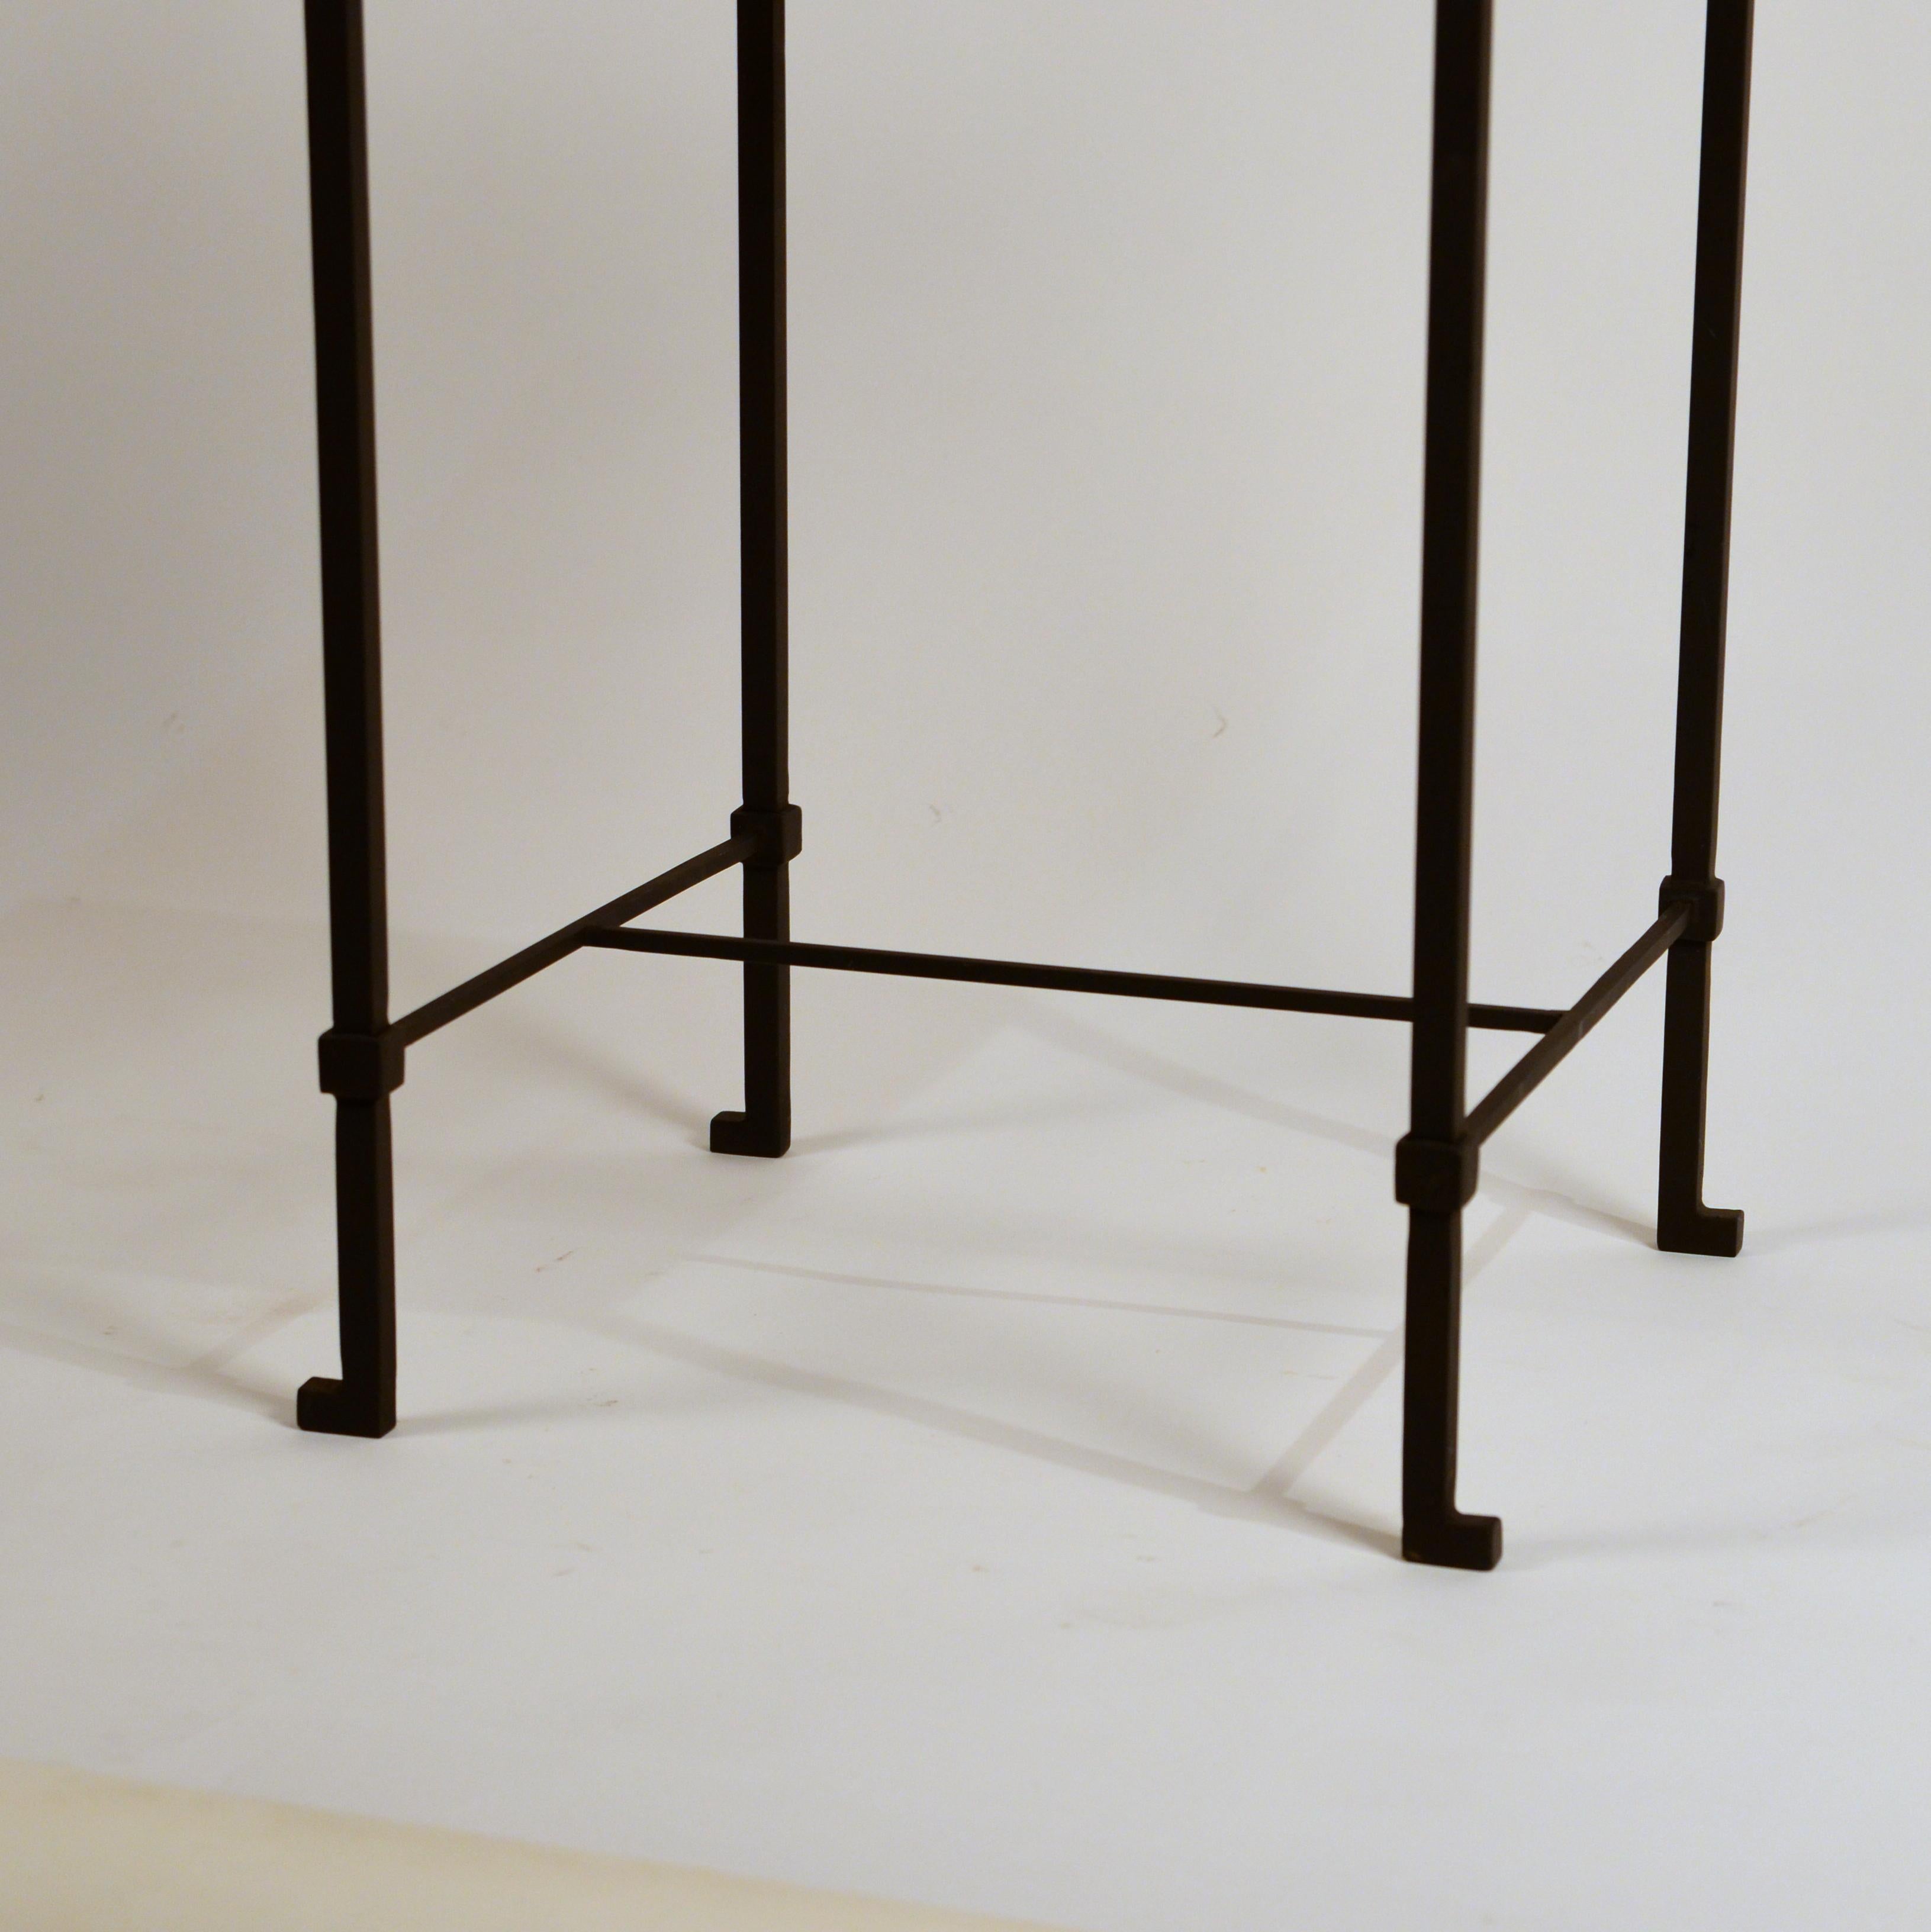 wrought iron drink table